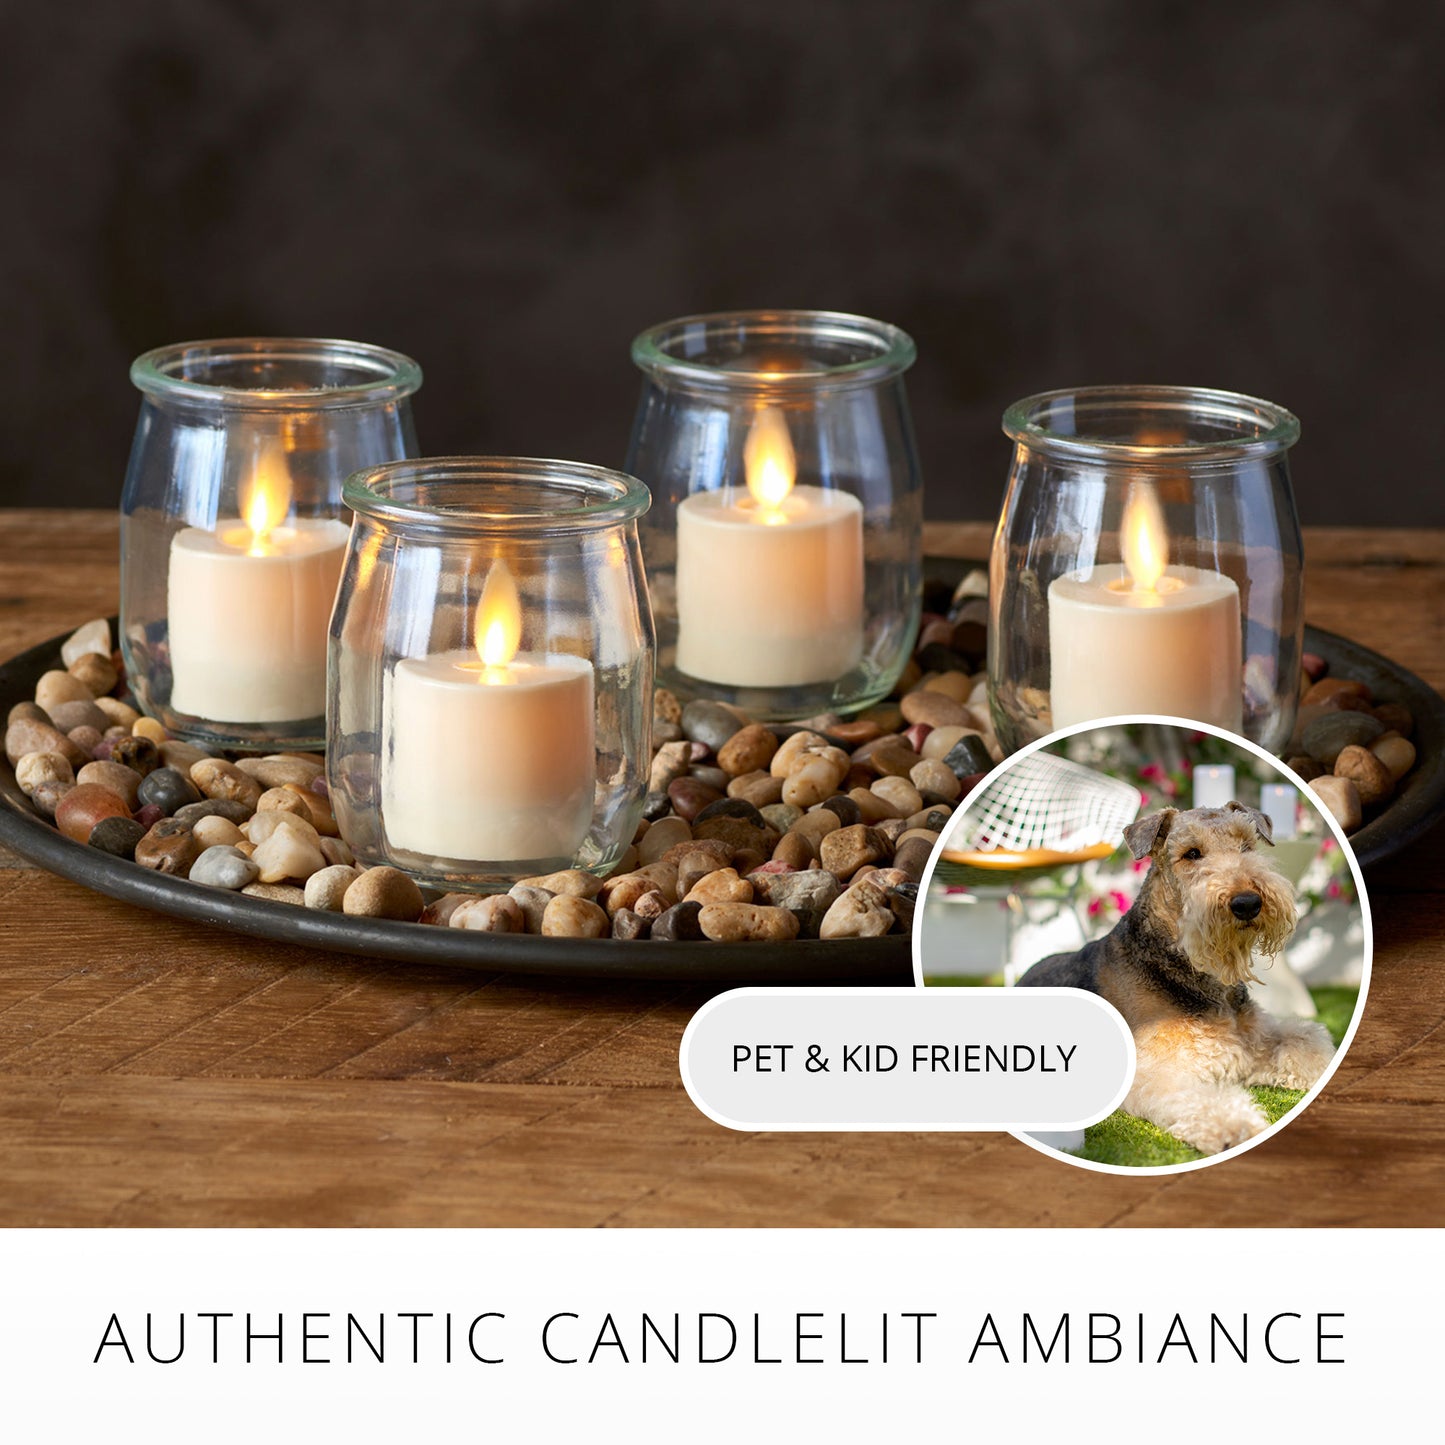 Pearl Ivory Flameless Candle Tealights - Flat Top - Set of 4